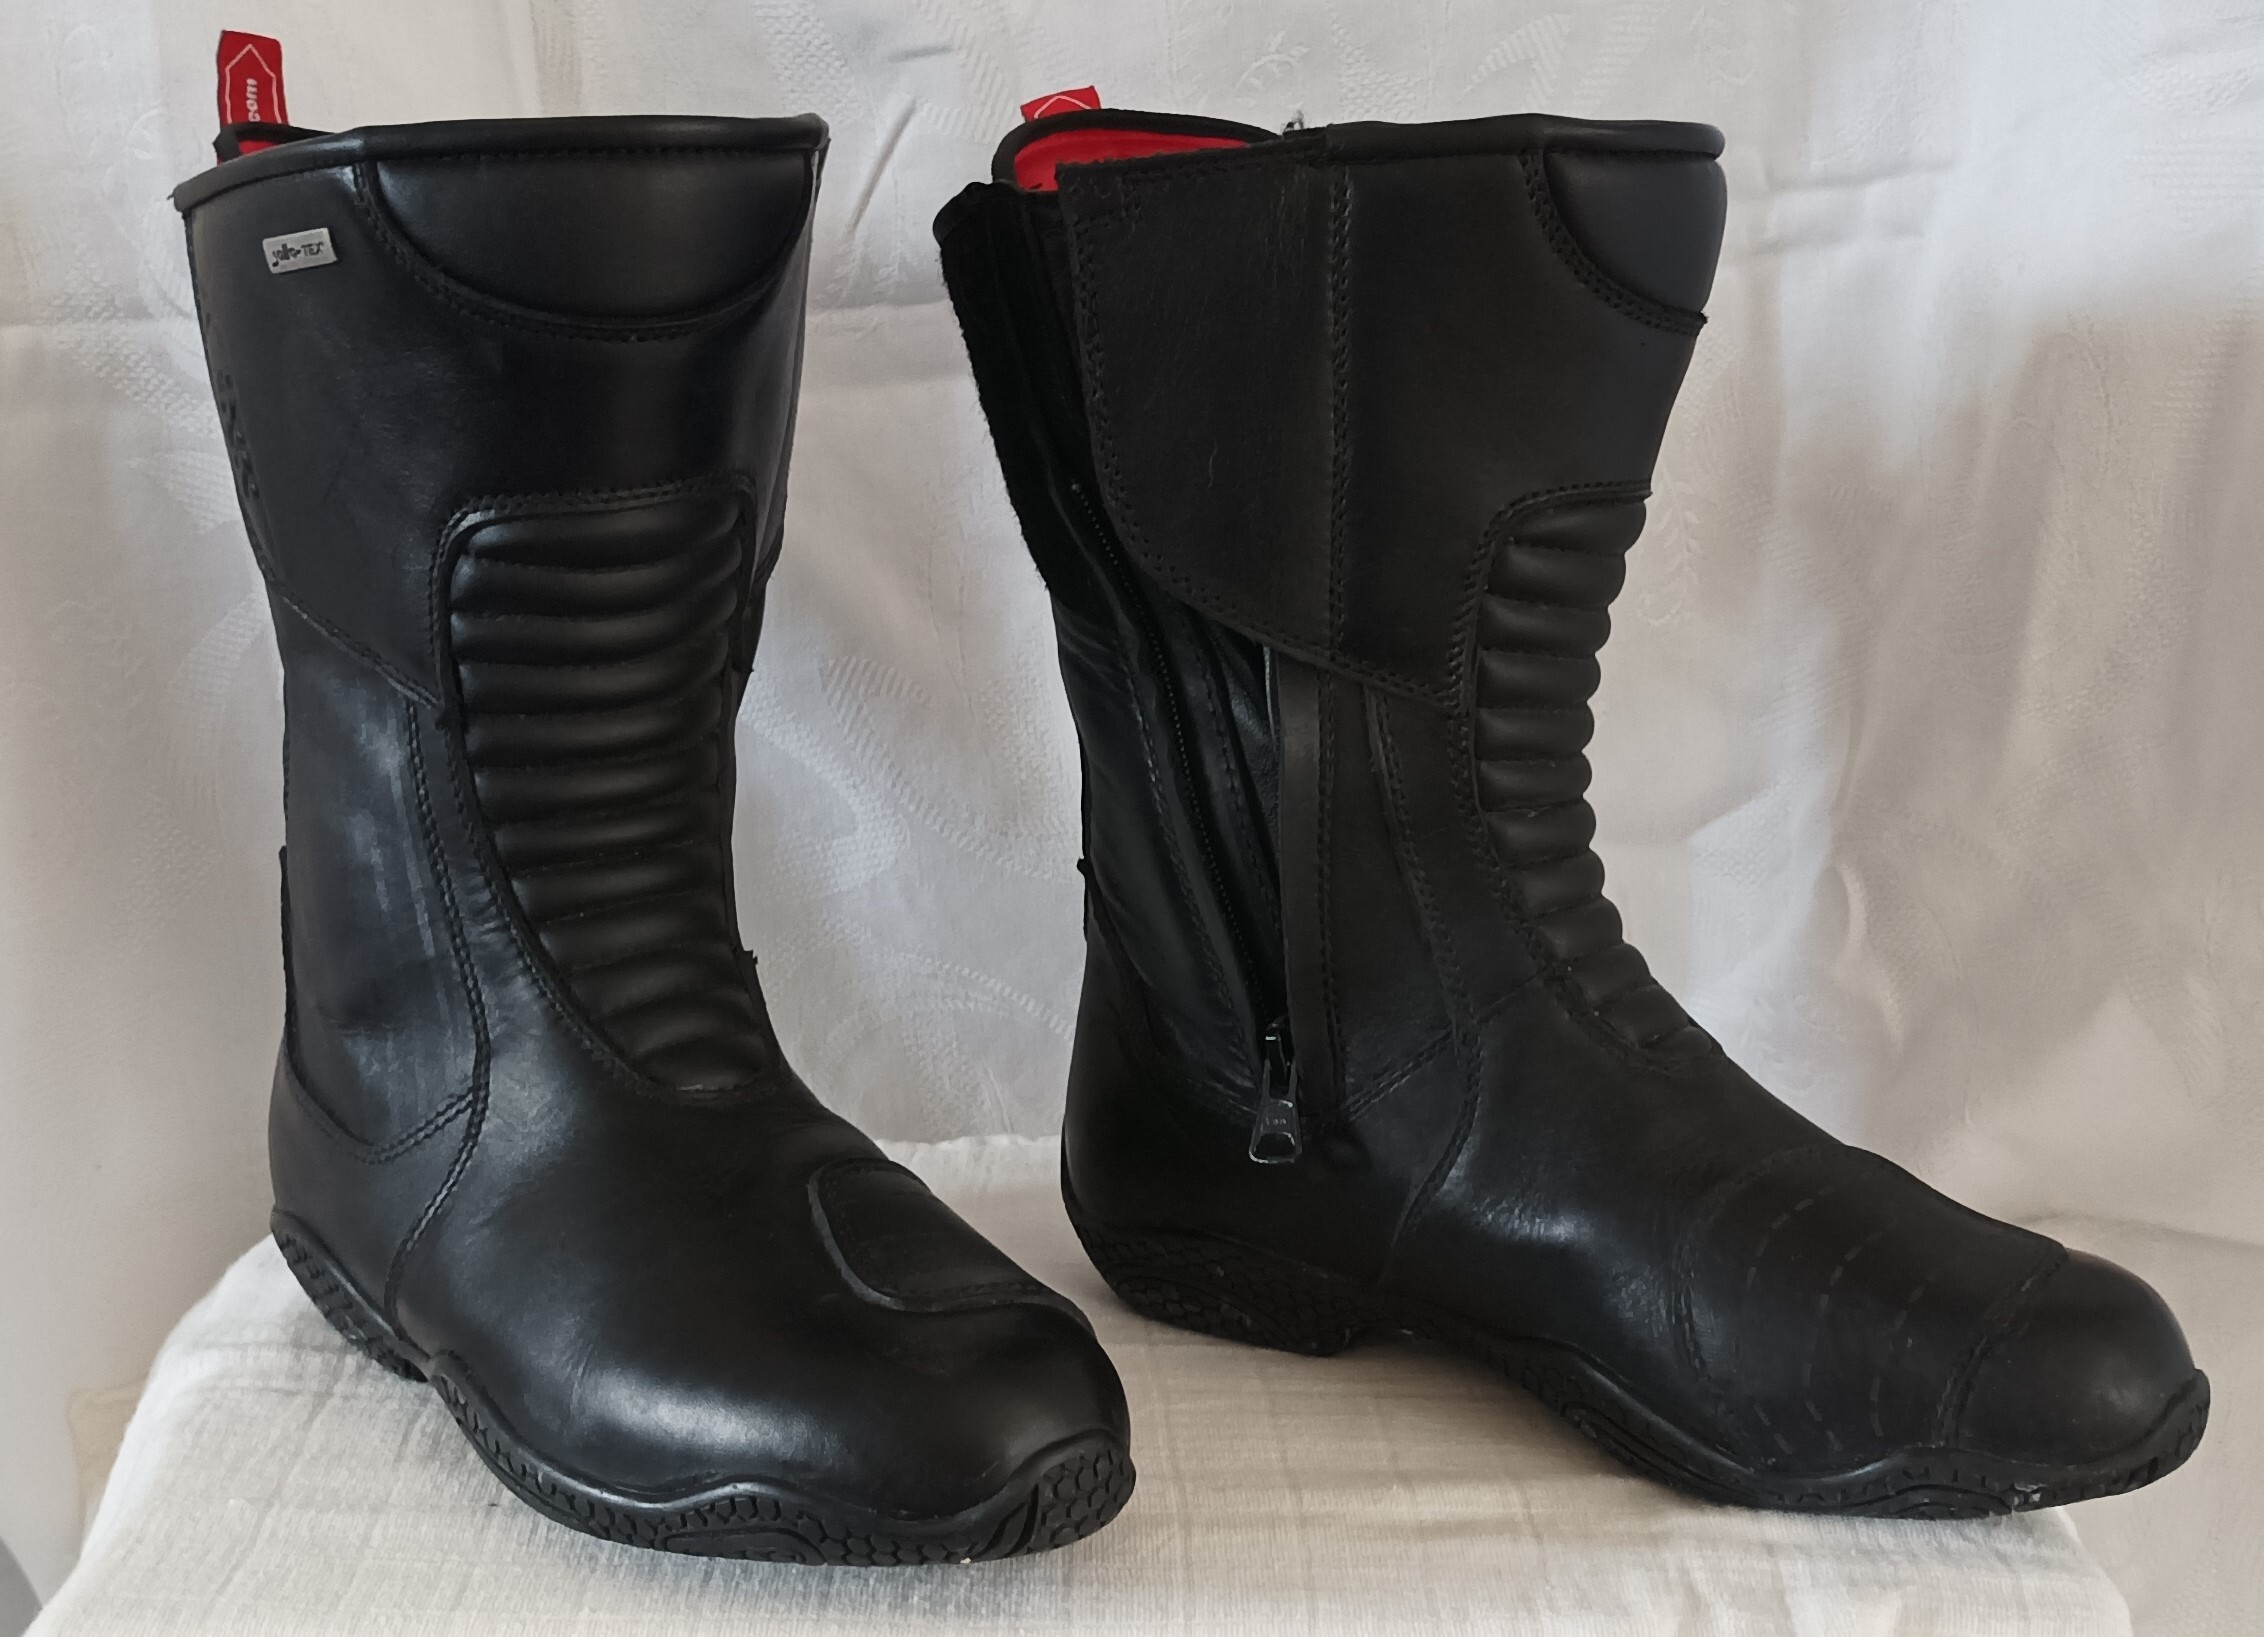 Bottes Femme IXS Taille 39 Zxsn